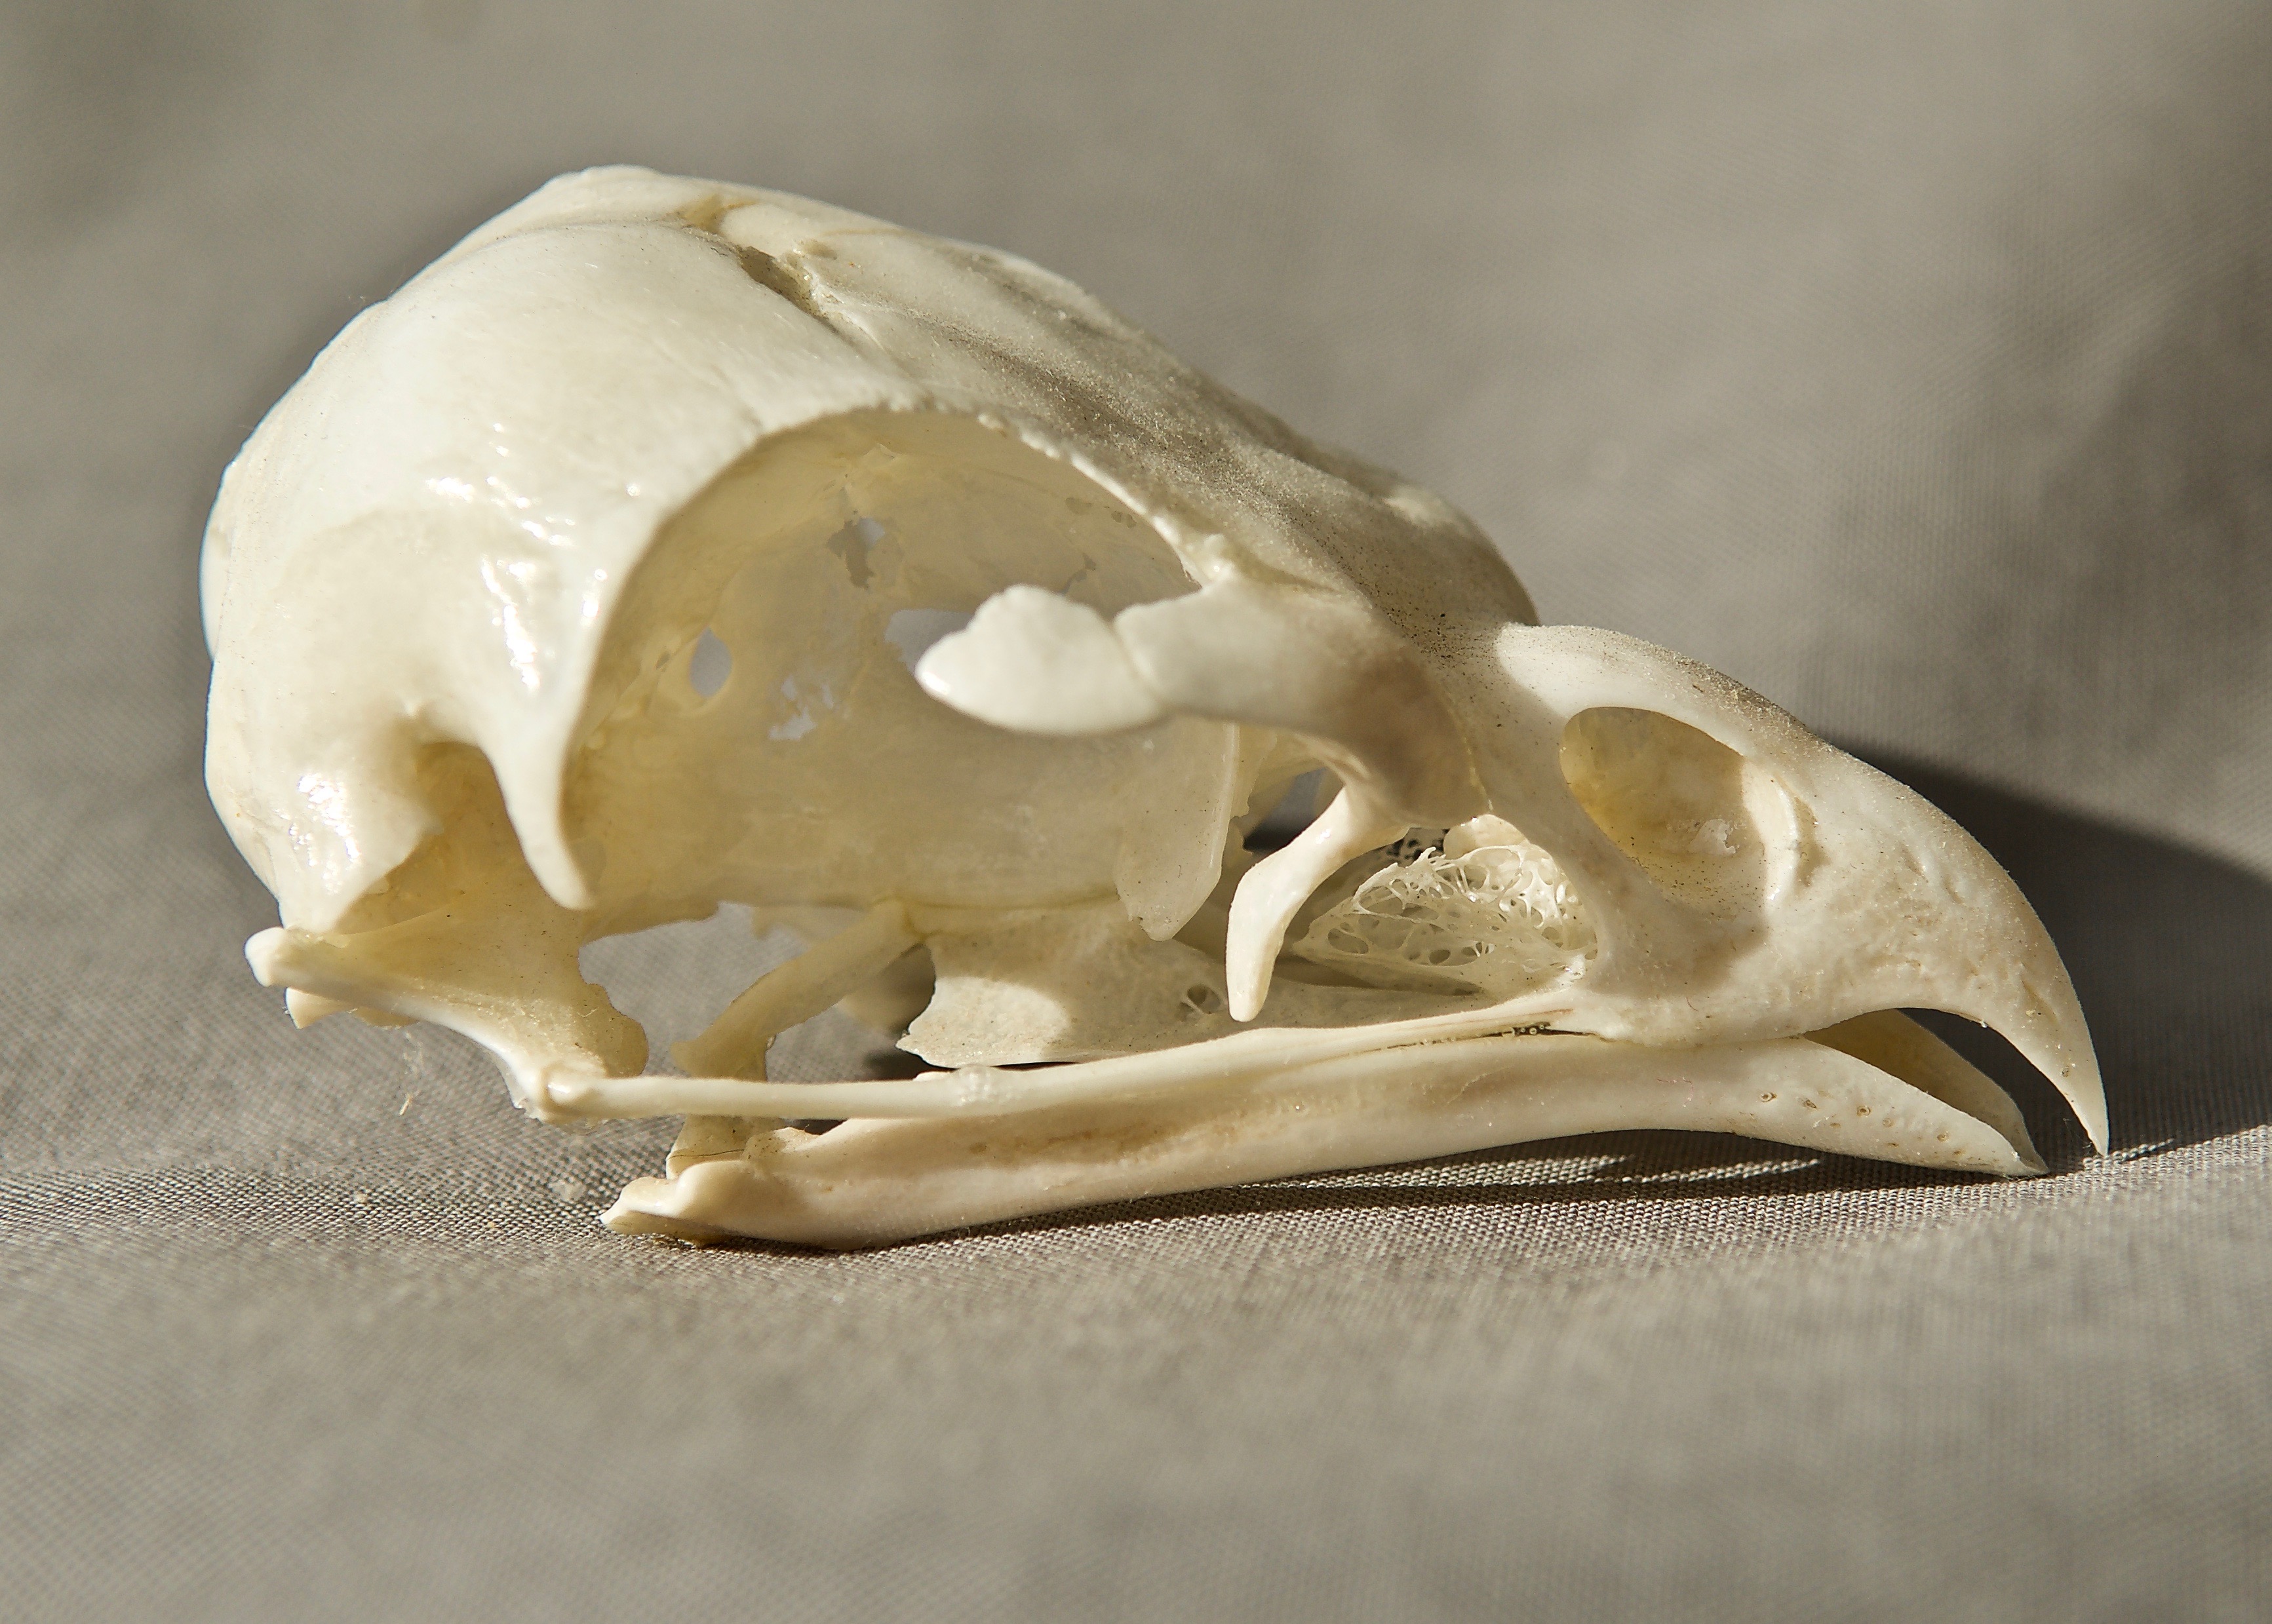 Red-Tailed Hawk Skull (Probably)